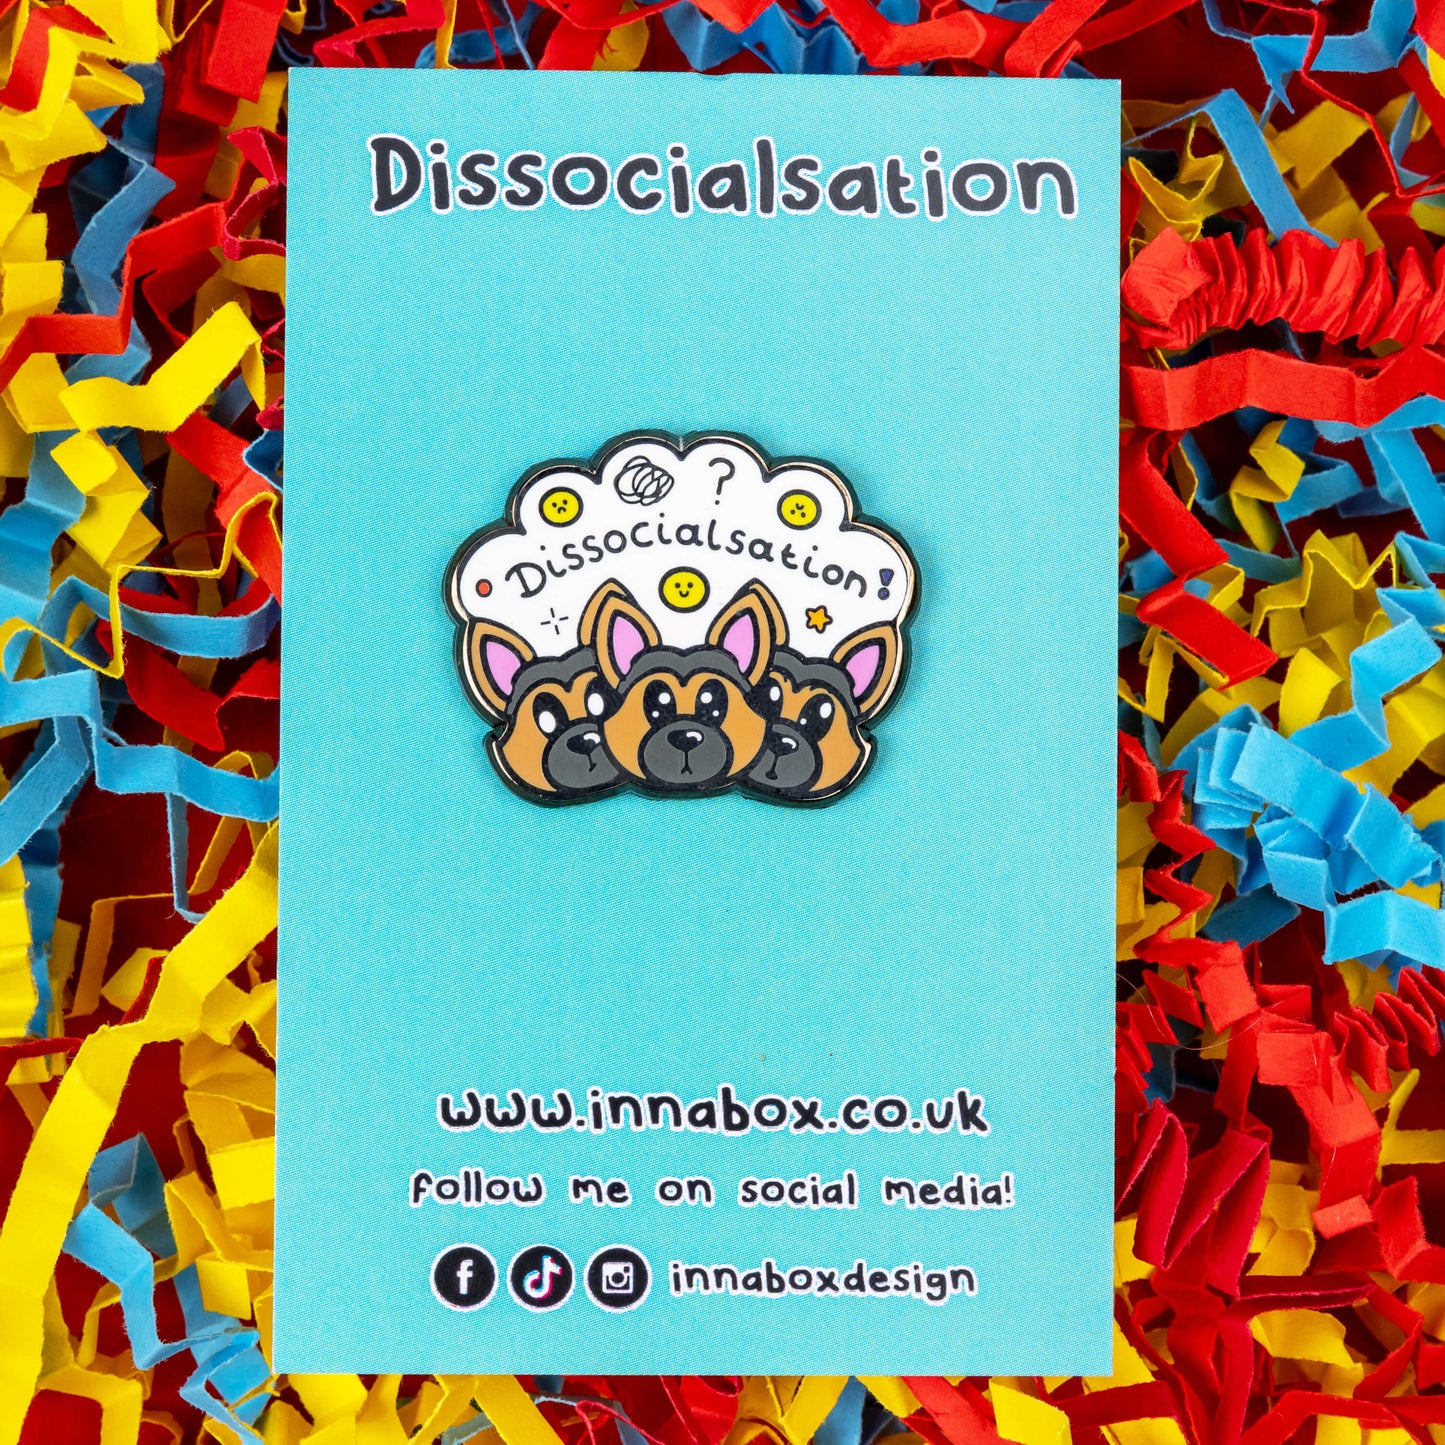 The Dissocialsation Enamel Pin - Dissociation on blue backing card on a red, blue and yellow card confetti background. Three confused brown and black Alsatian dog heads with their ears perked up, above them is a white cloud with sad and happy yellow faces, sparkles, question marks and black text reading 'dissocialsation!'. The design is raising awareness for dissociation.